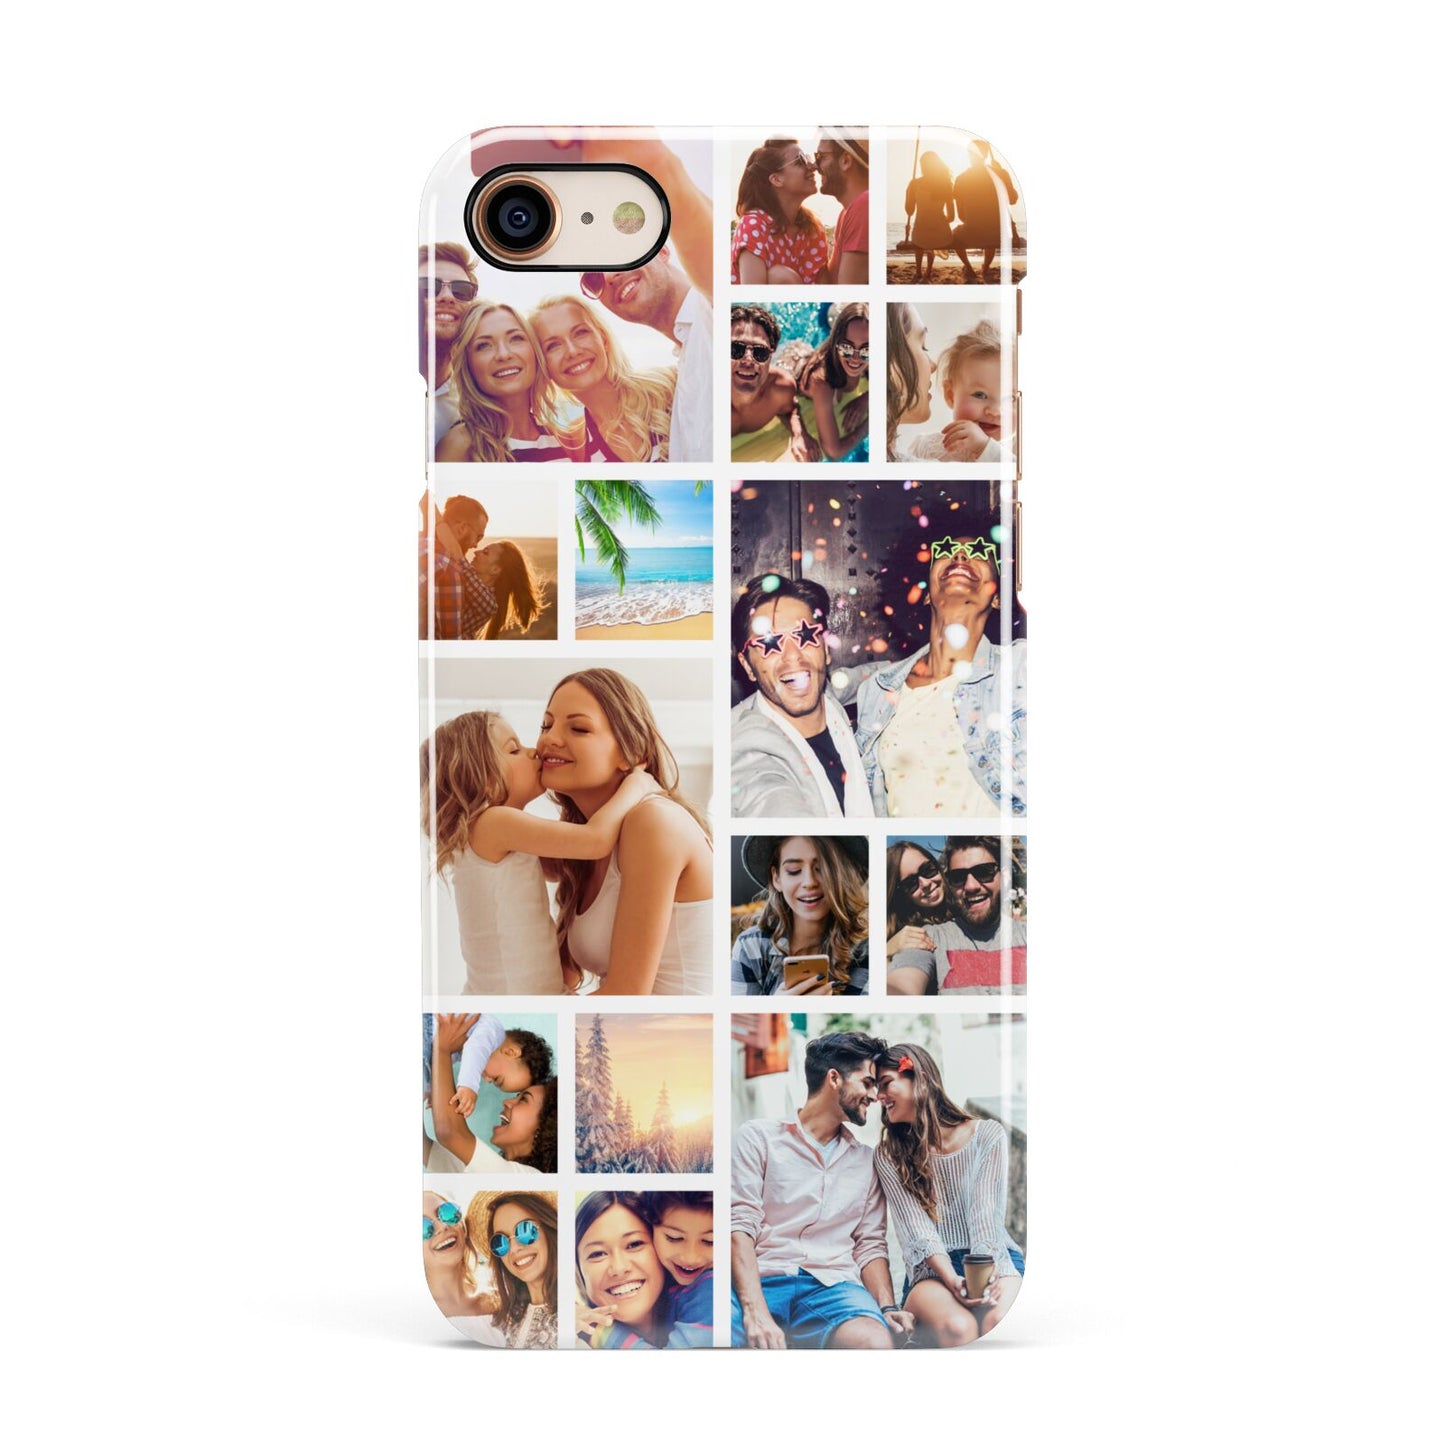 Abstract Multi Tile Photo Montage Upload Apple iPhone 7 8 3D Snap Case